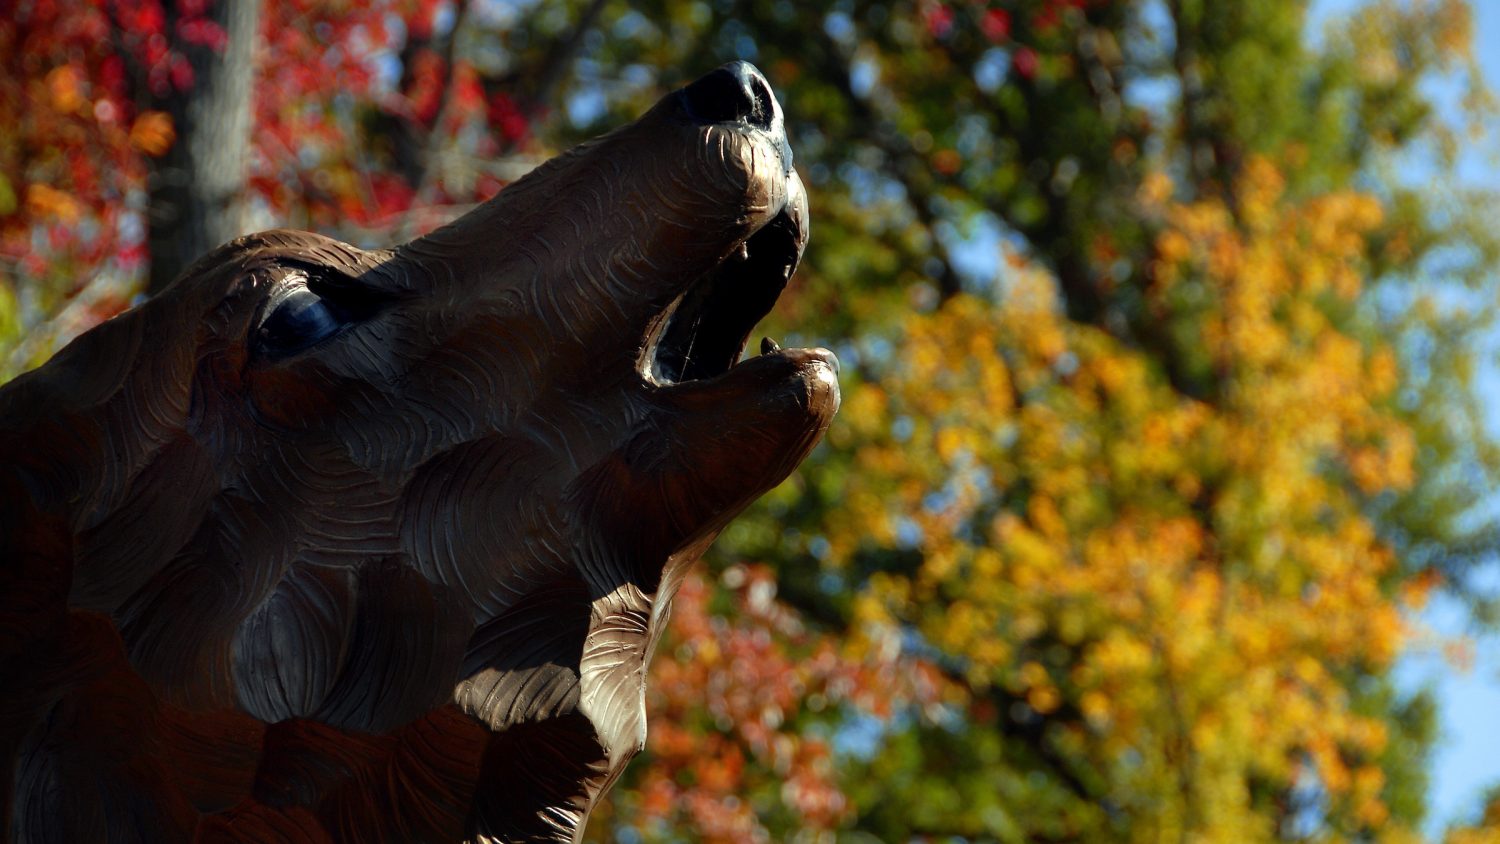 Wolf statue behind Park Alumni Center on Centennial Campus. PHOTO BY ROGER WINSTEAD